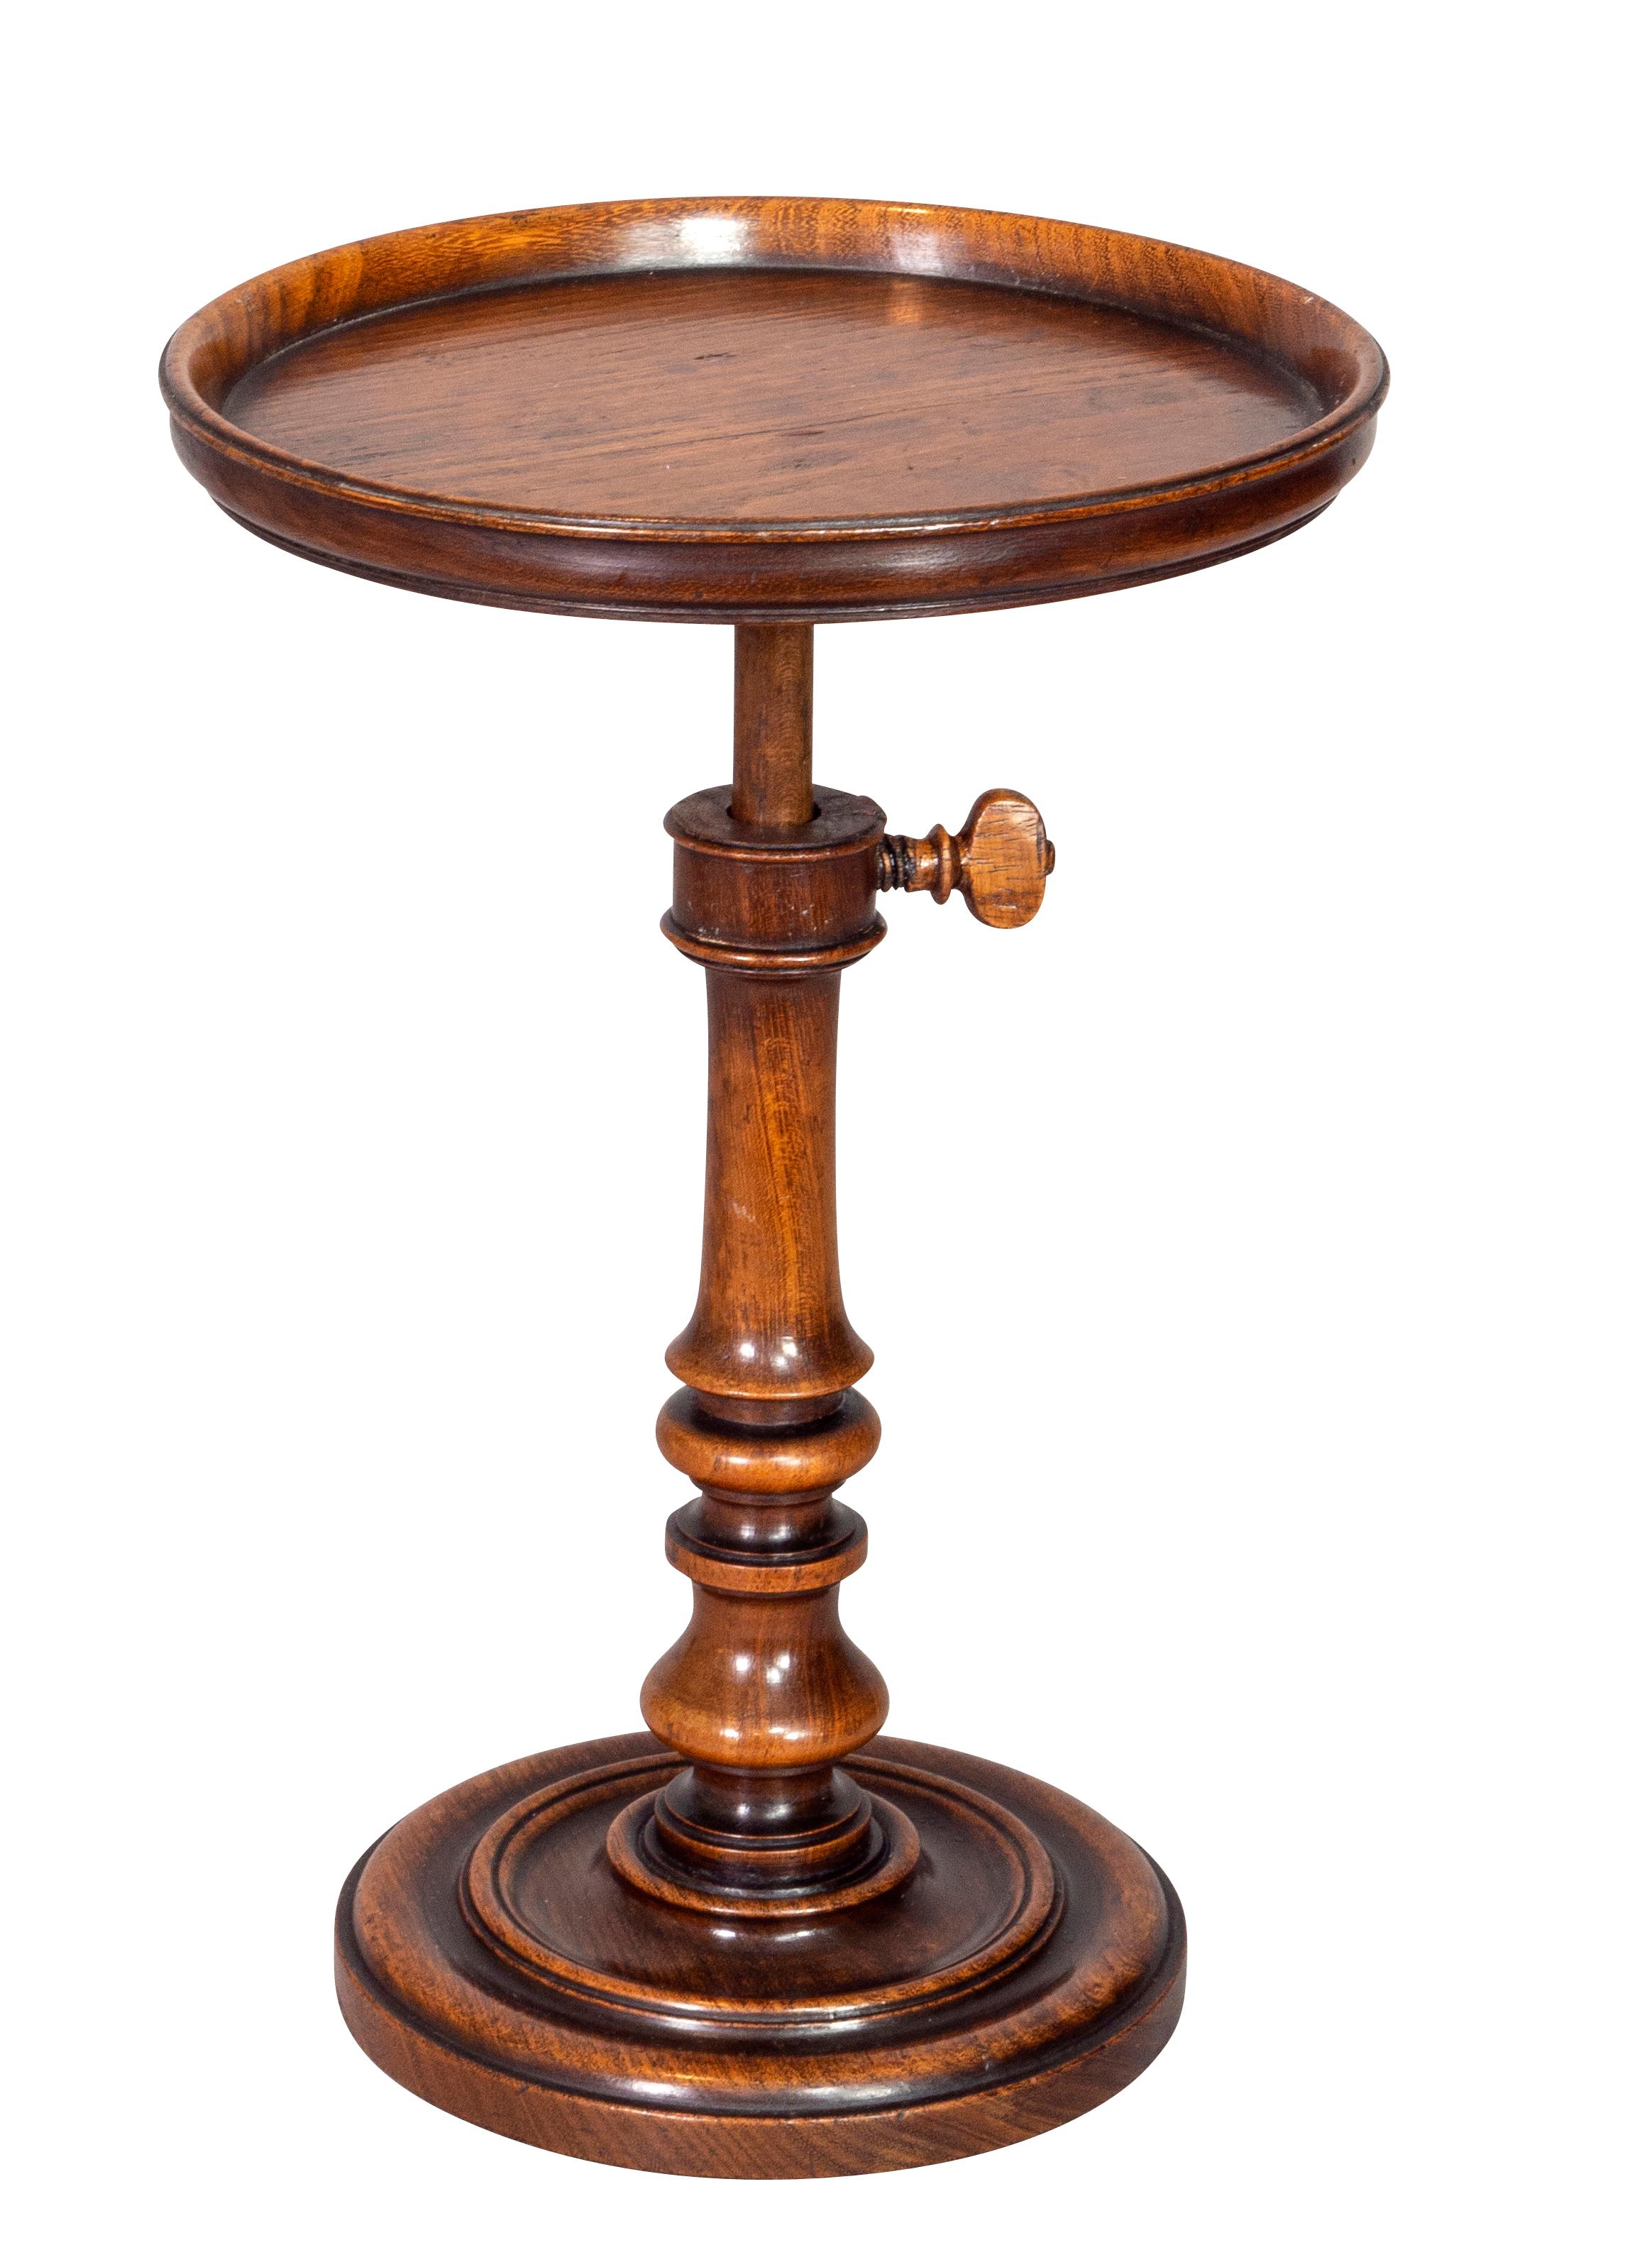 Candle risers enabled a person working or reading by candle light to adjust the height of the candle. This also comes under the category of treen ware.